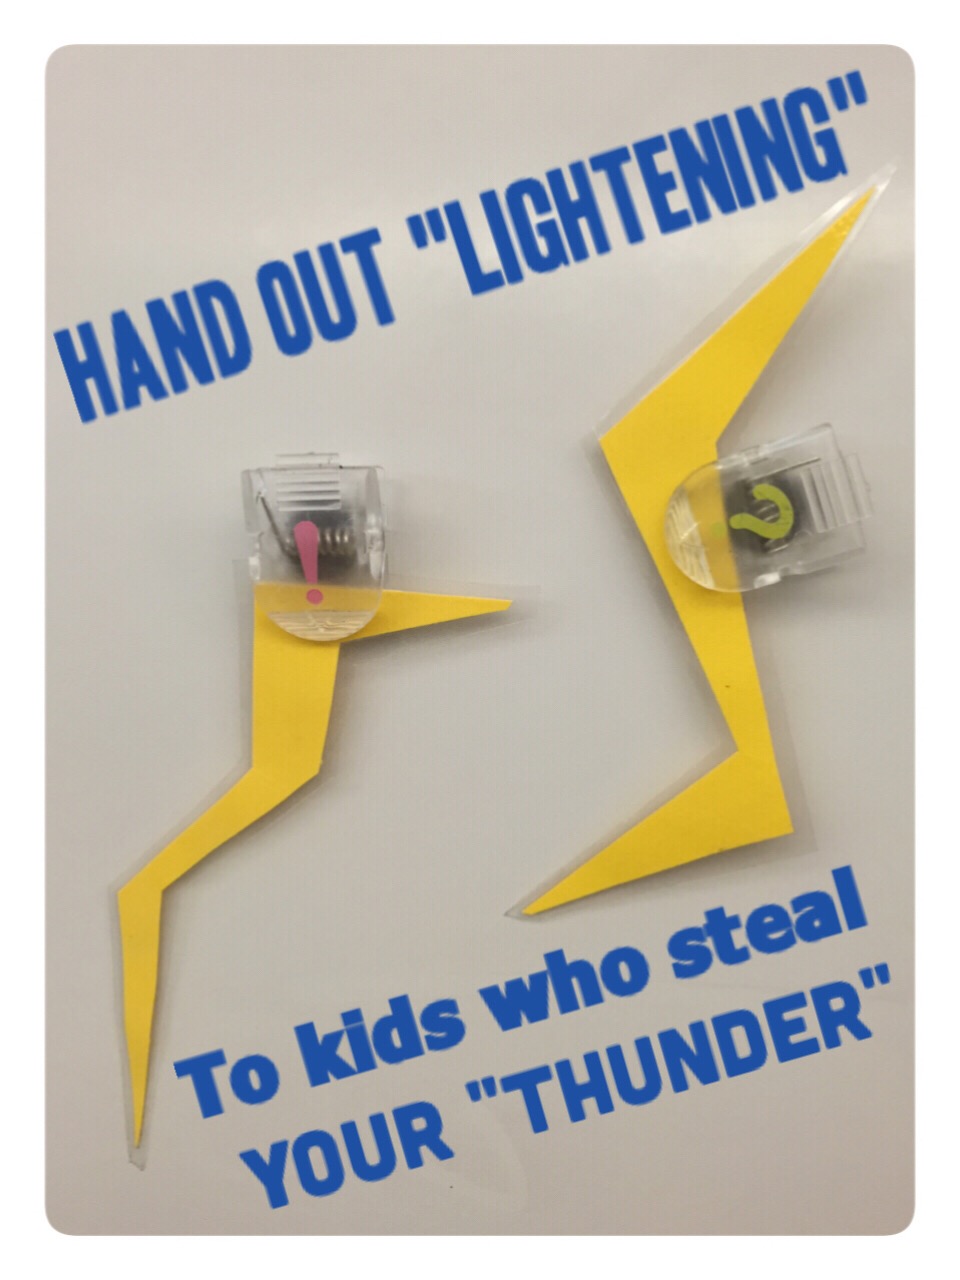 Reluctant student participation? Hand out lightening bolts to students who "steal your thunder" and guess what you are about to say!  www.theardentteacher.com